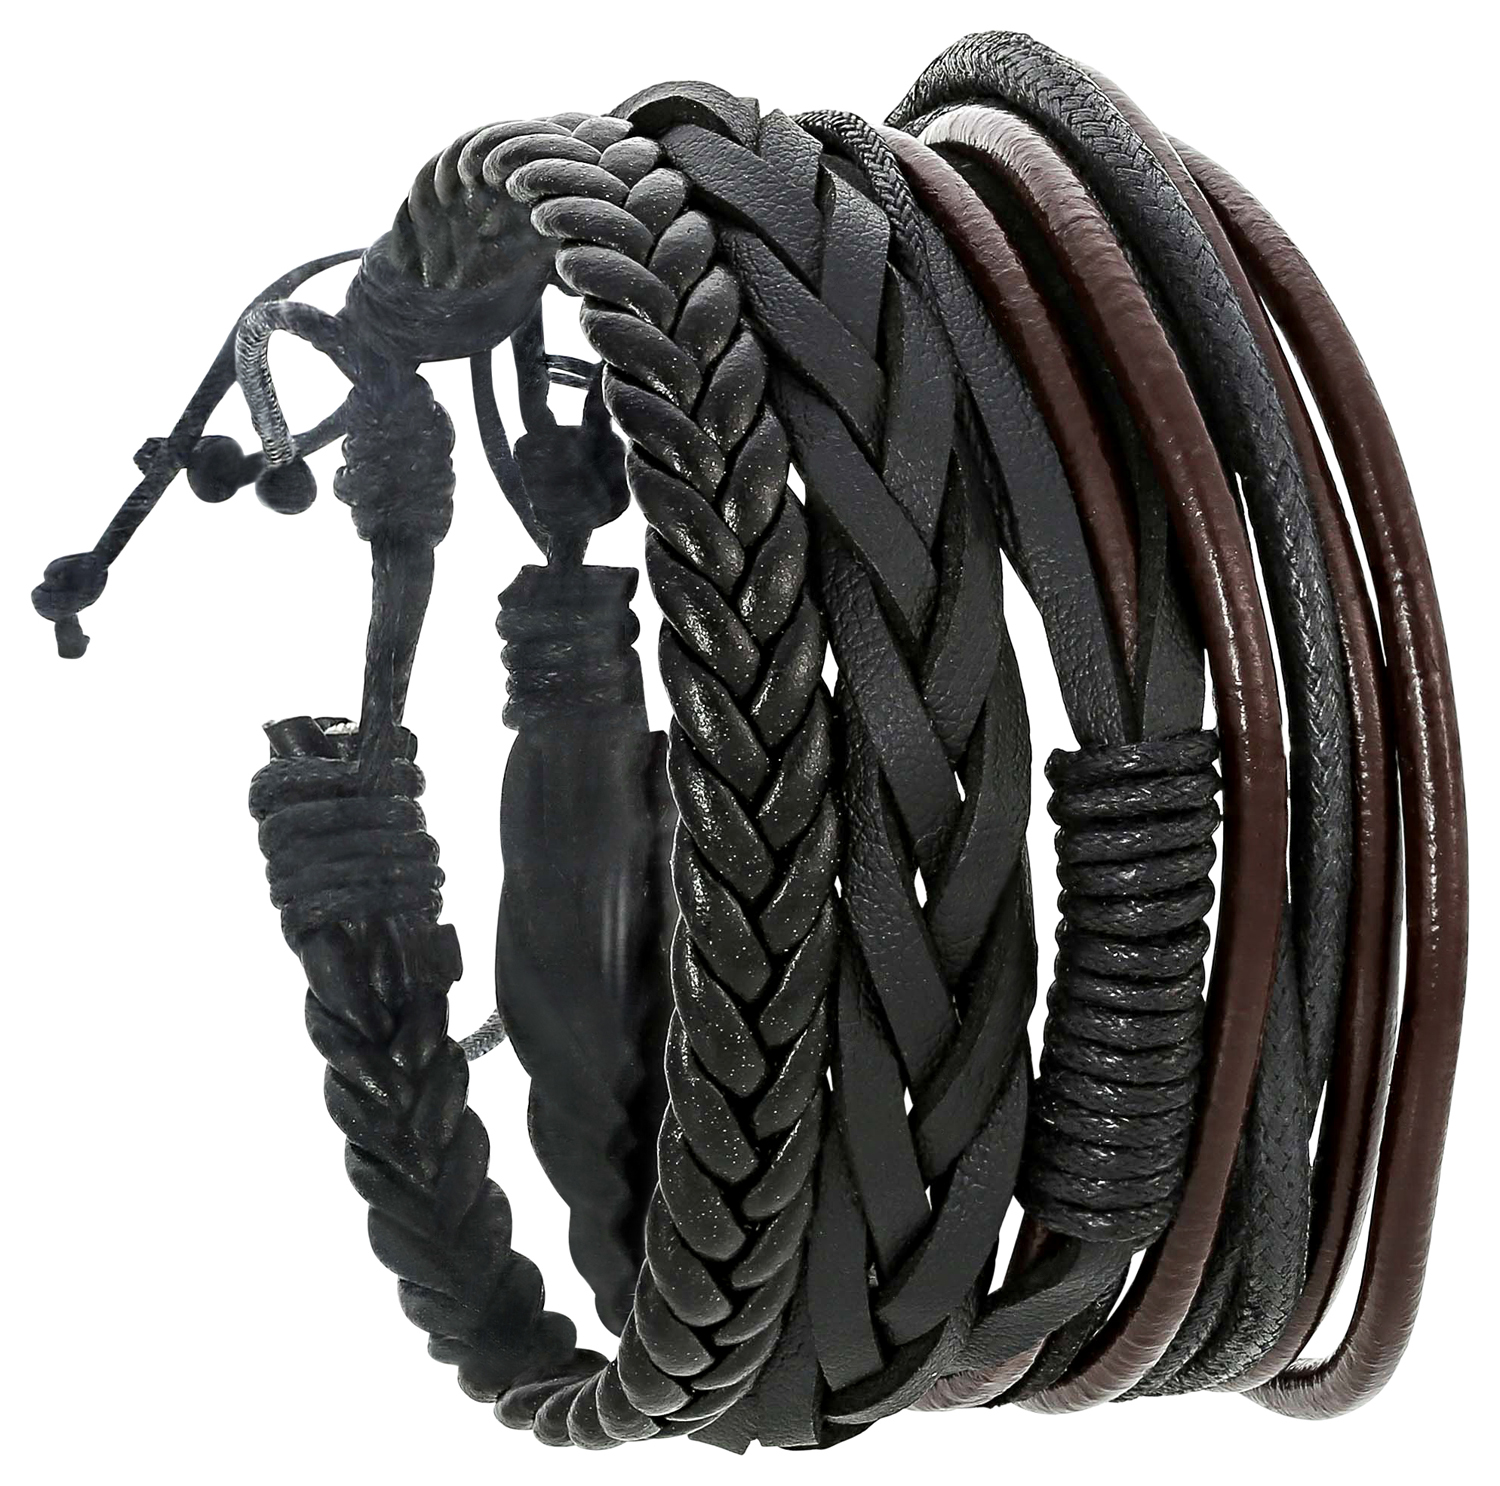 Bracelet Homme - Much Leather